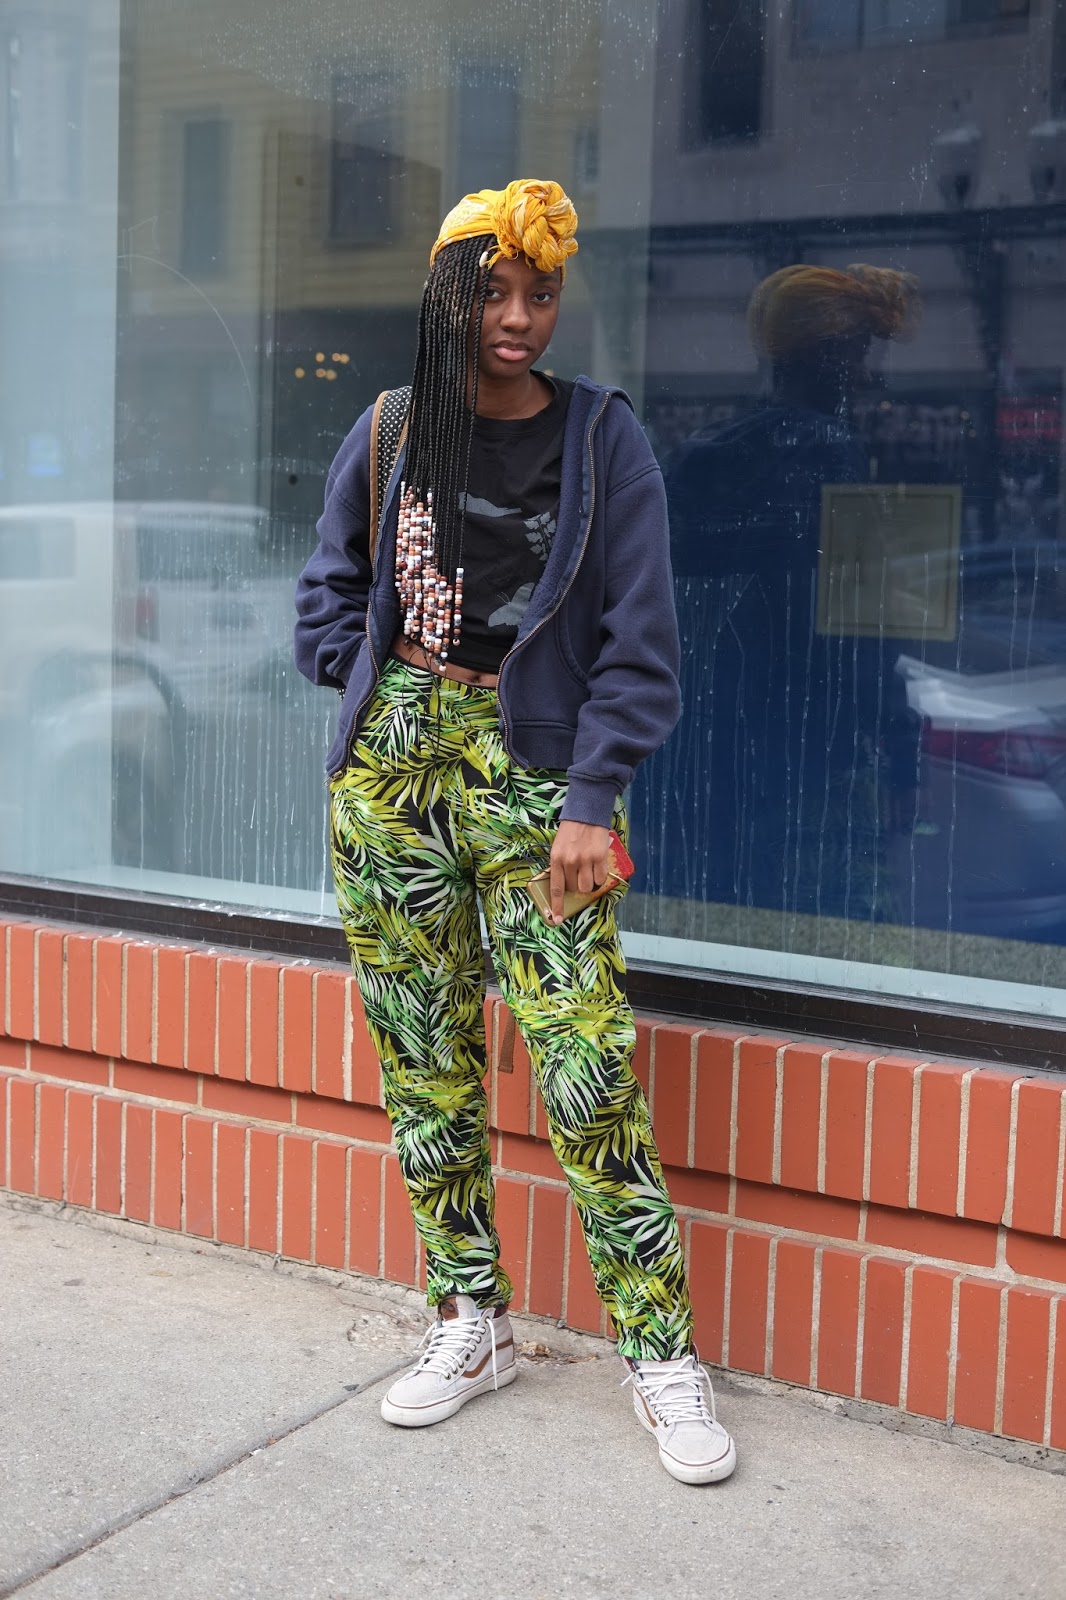 CHICAGO LOOKS ***** a Chicago Street Style + Fashion Blog*****